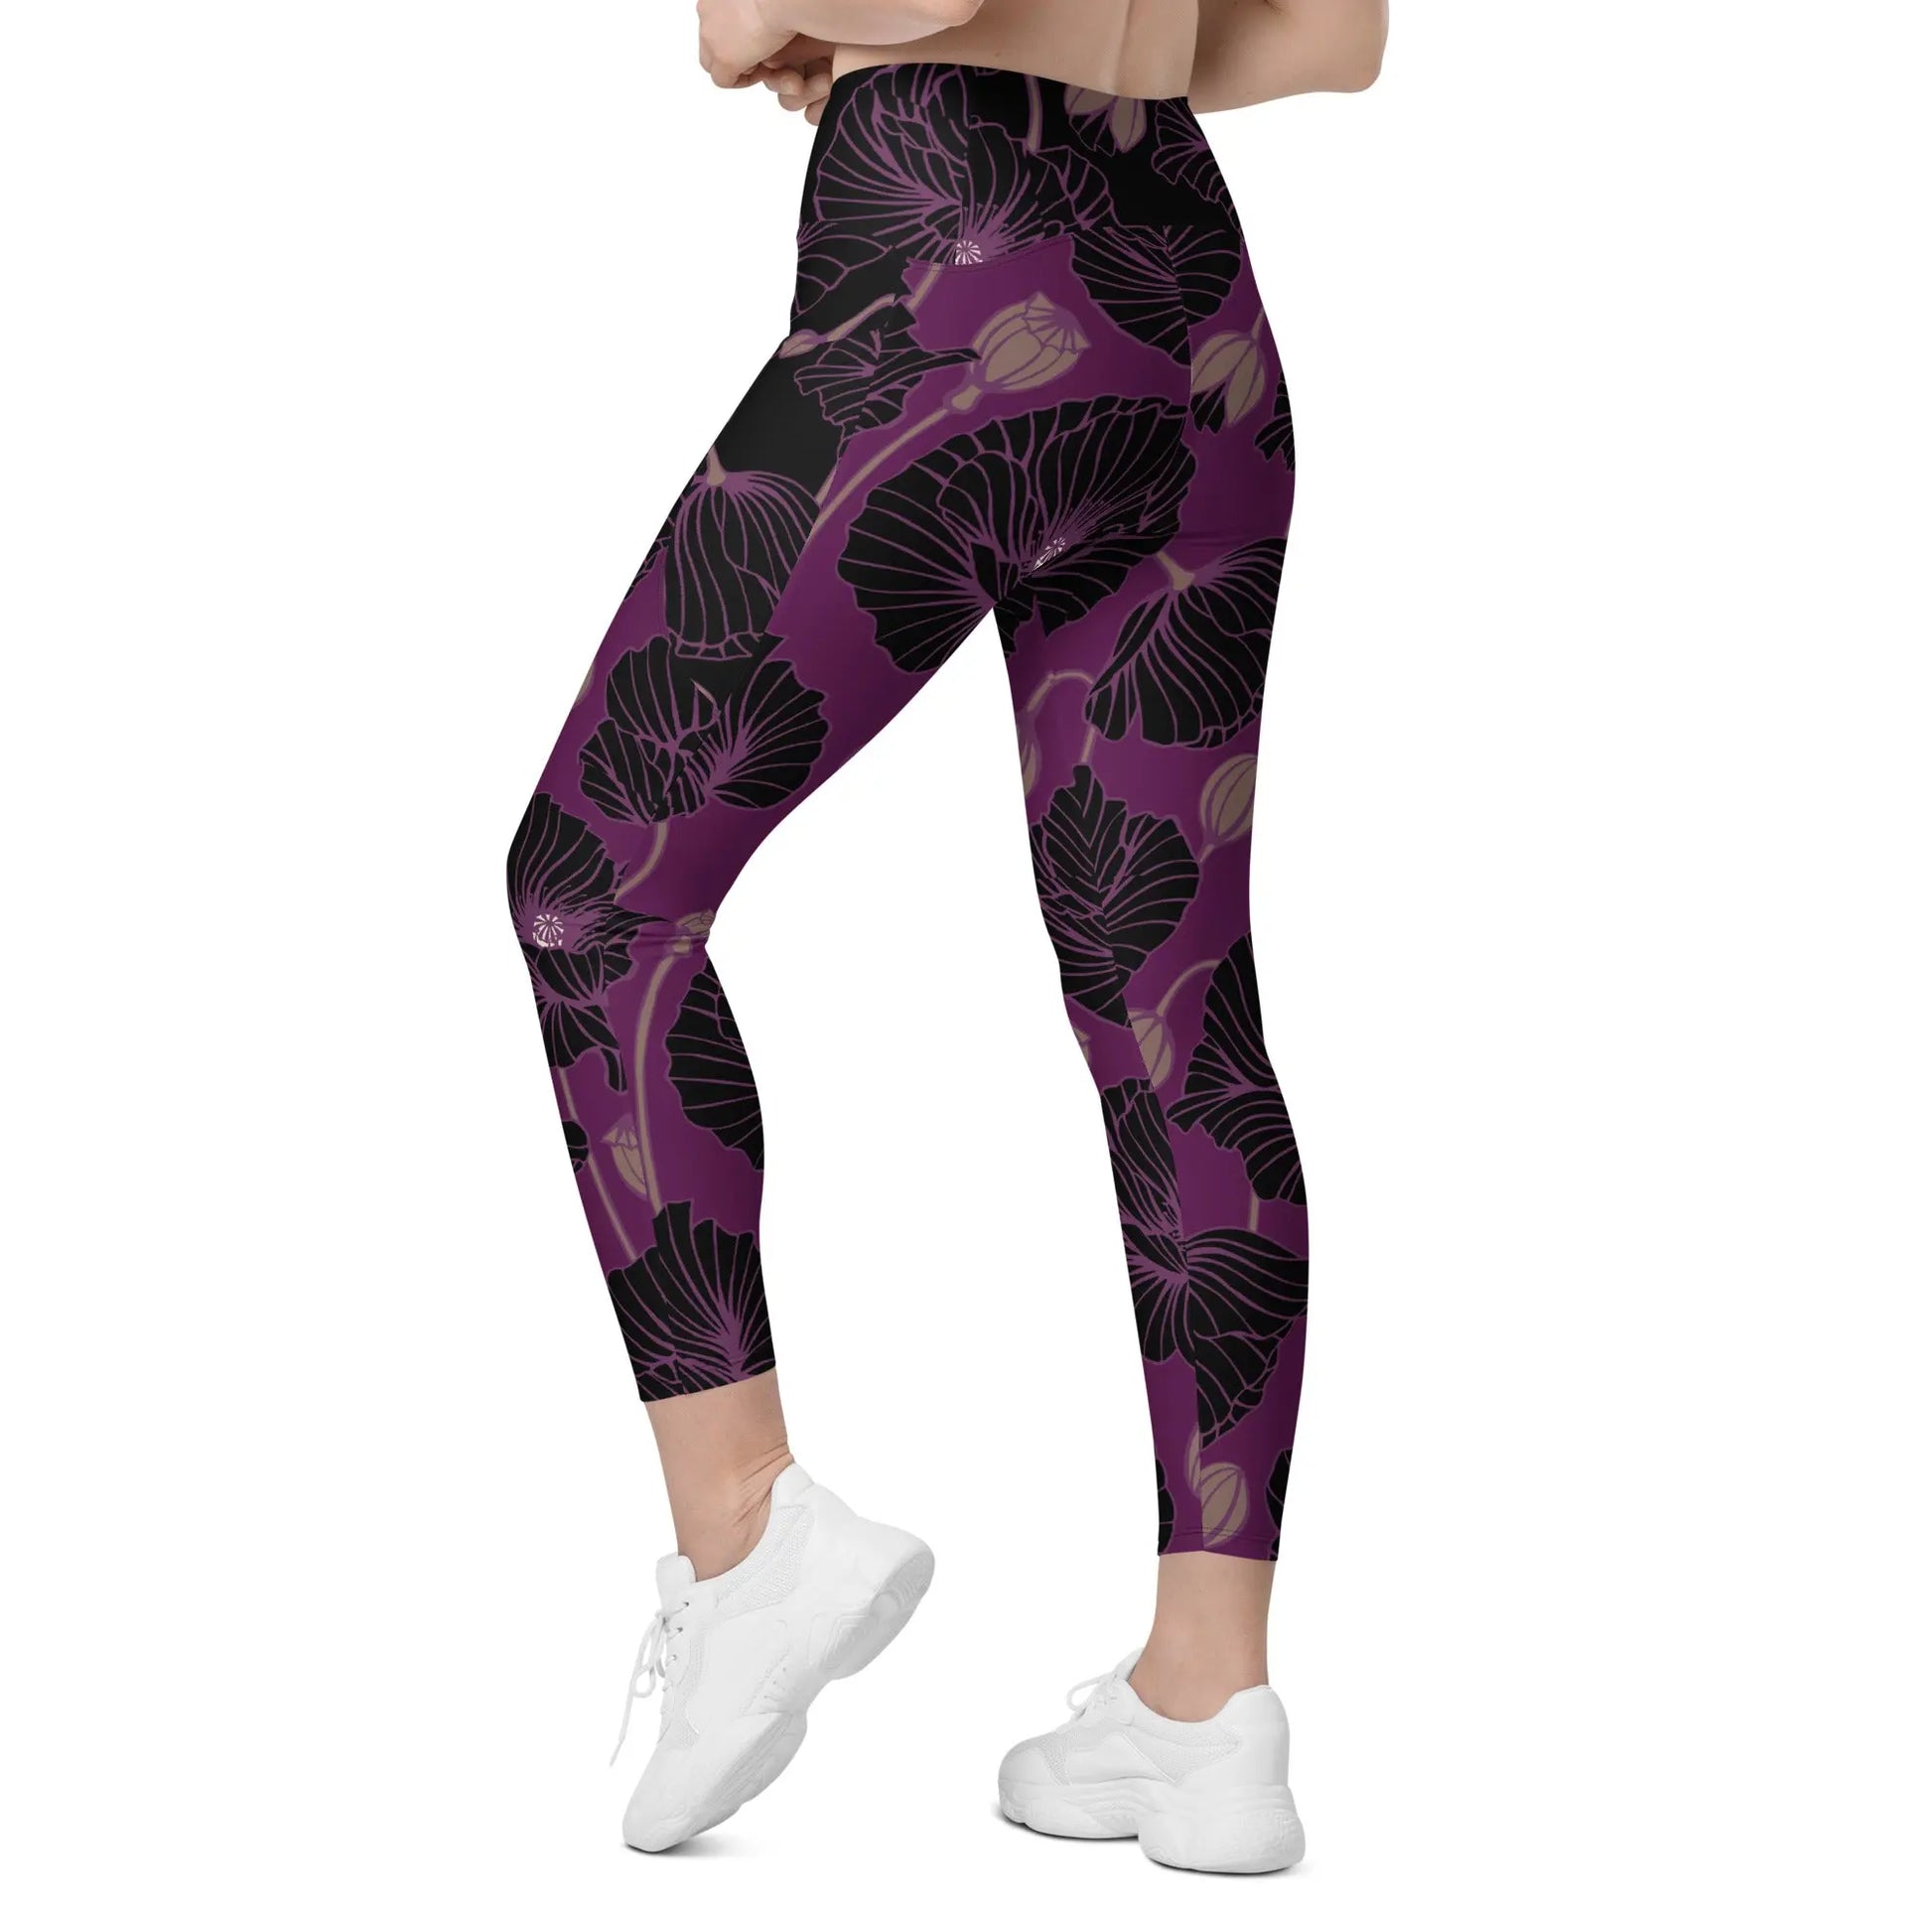 Dark Poppy Combo Printed Legging with Pockets Ellie Day Activewear